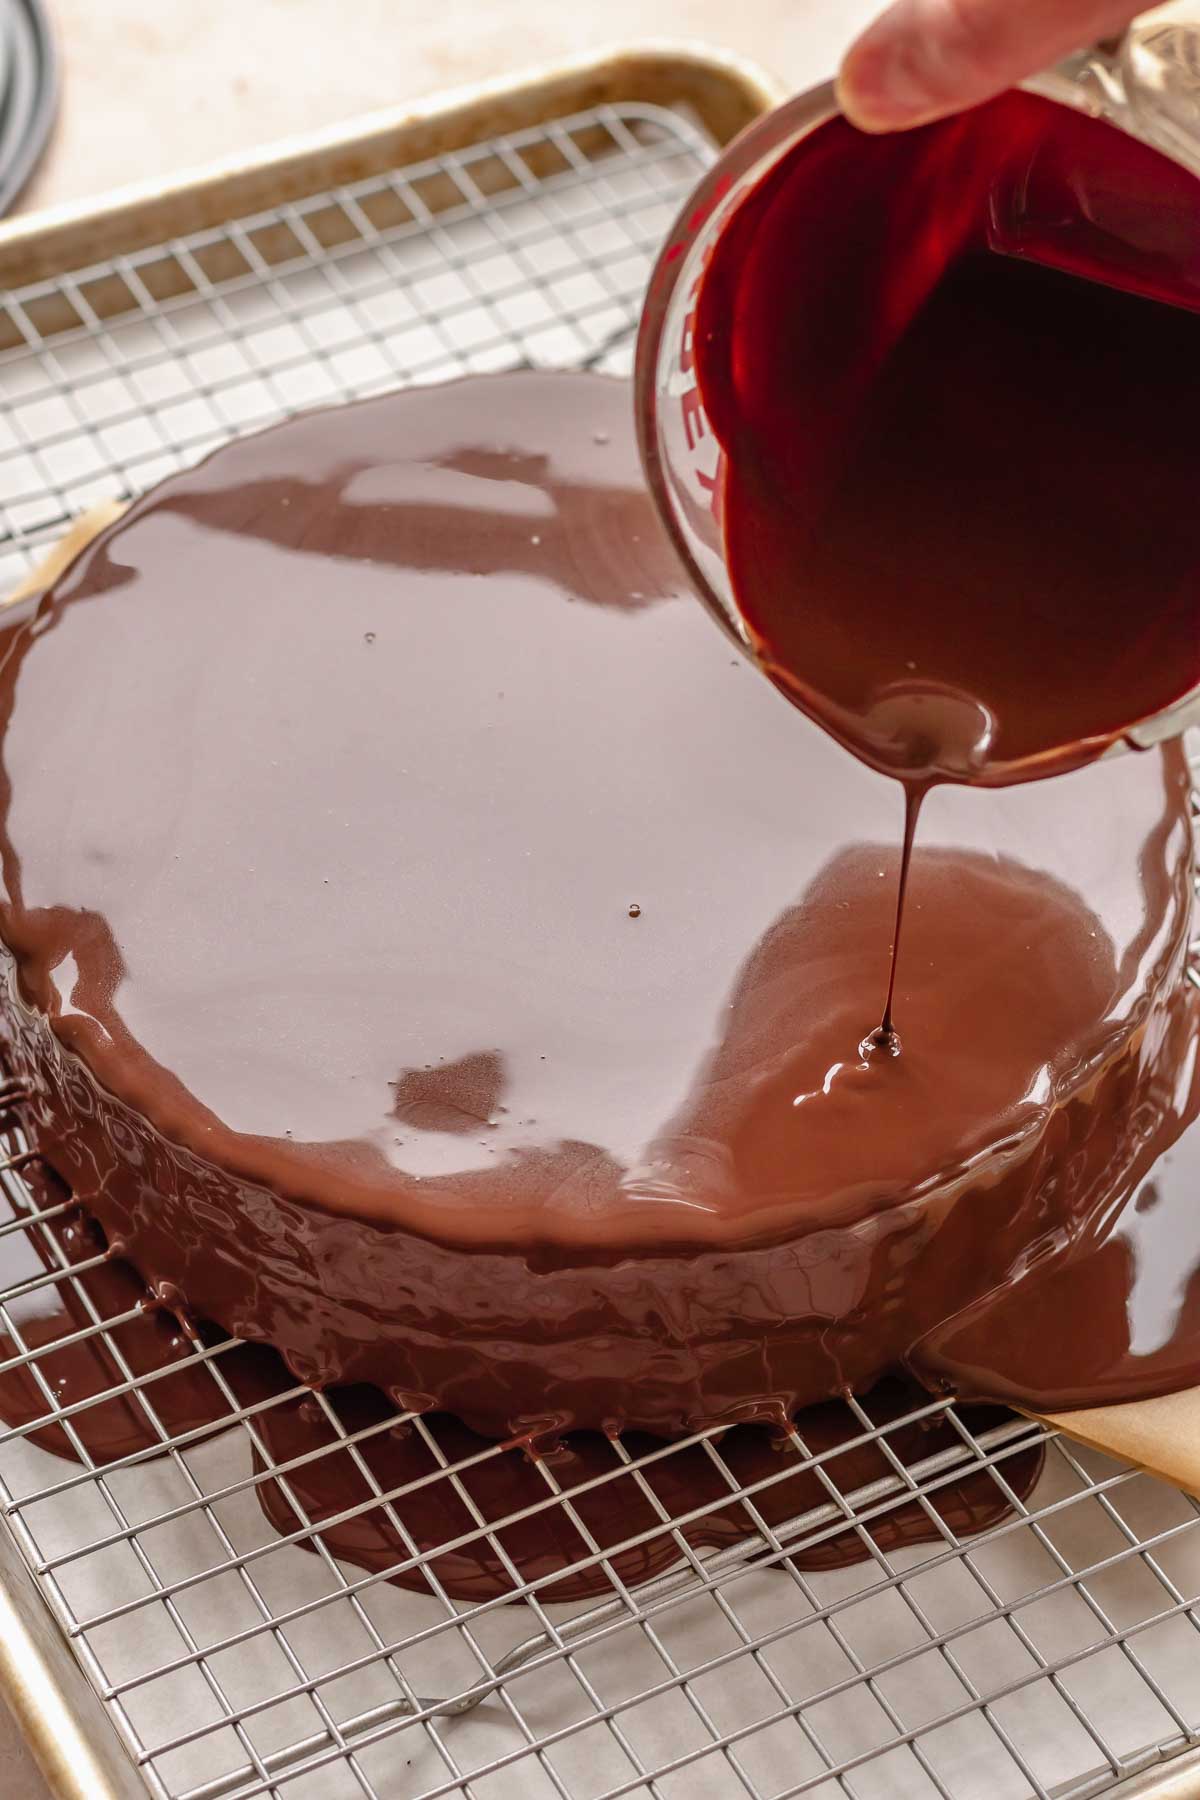 Chocolate ganache being poured over the cake.